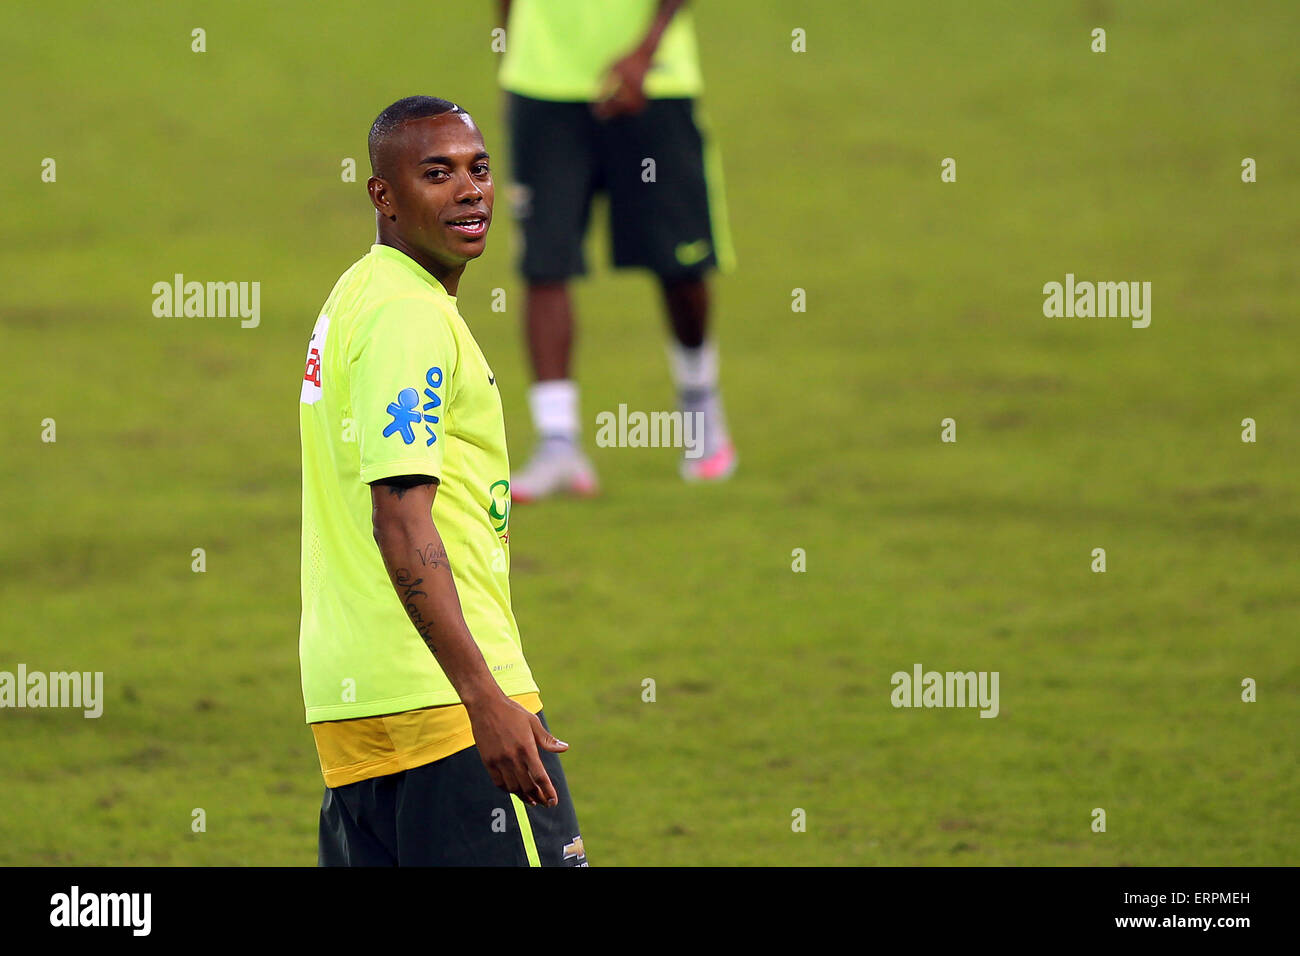 Sao Paulo, Brazil. 6th June, 2015. Player Robinho of Brazil's national soccer team takes part a training session in Sao Paulo, Brazil, on June 6, 2015. Brazil will face Mexico in a friendly match on Sunday, before their participation in the Copa America 2015 finals, to be held in Chile from June 11 to July 4. © Rahel Patrasso/Xinhua/Alamy Live News Stock Photo